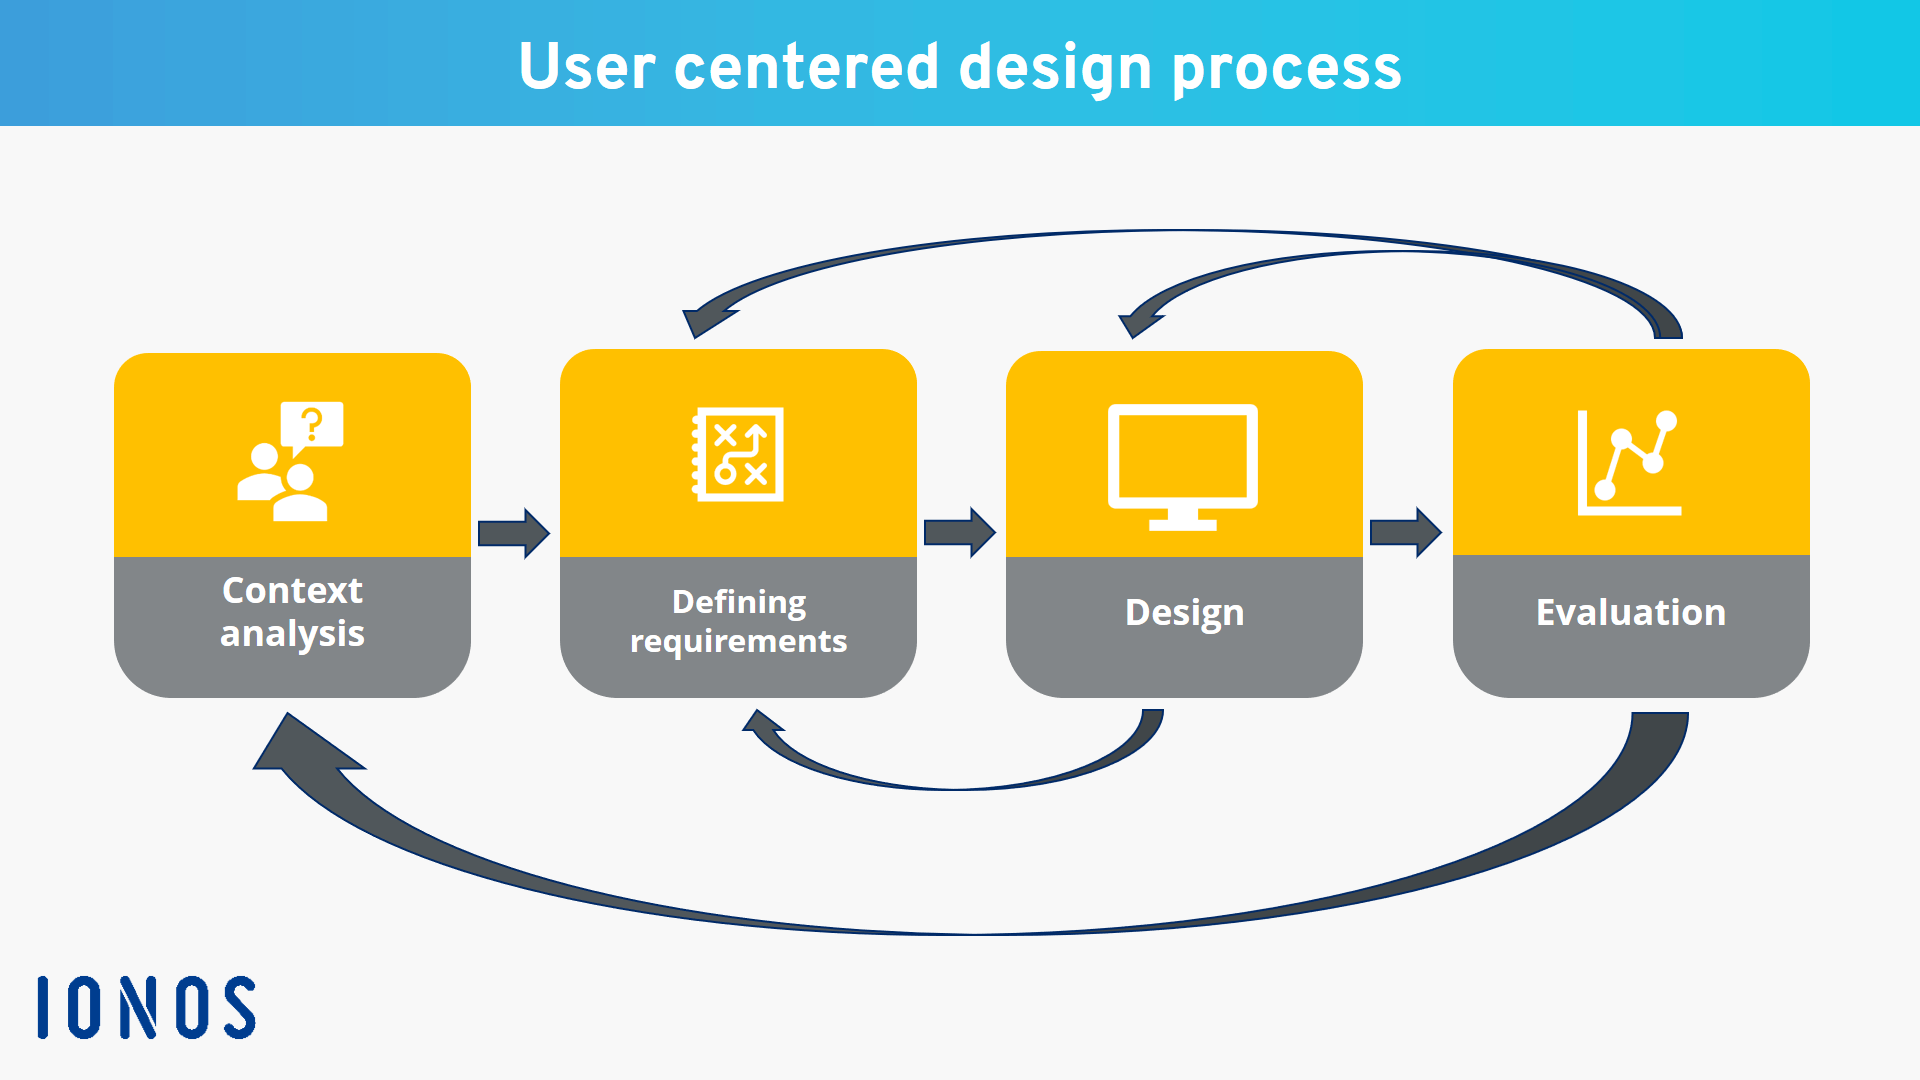 The four phases of the user-centered design process